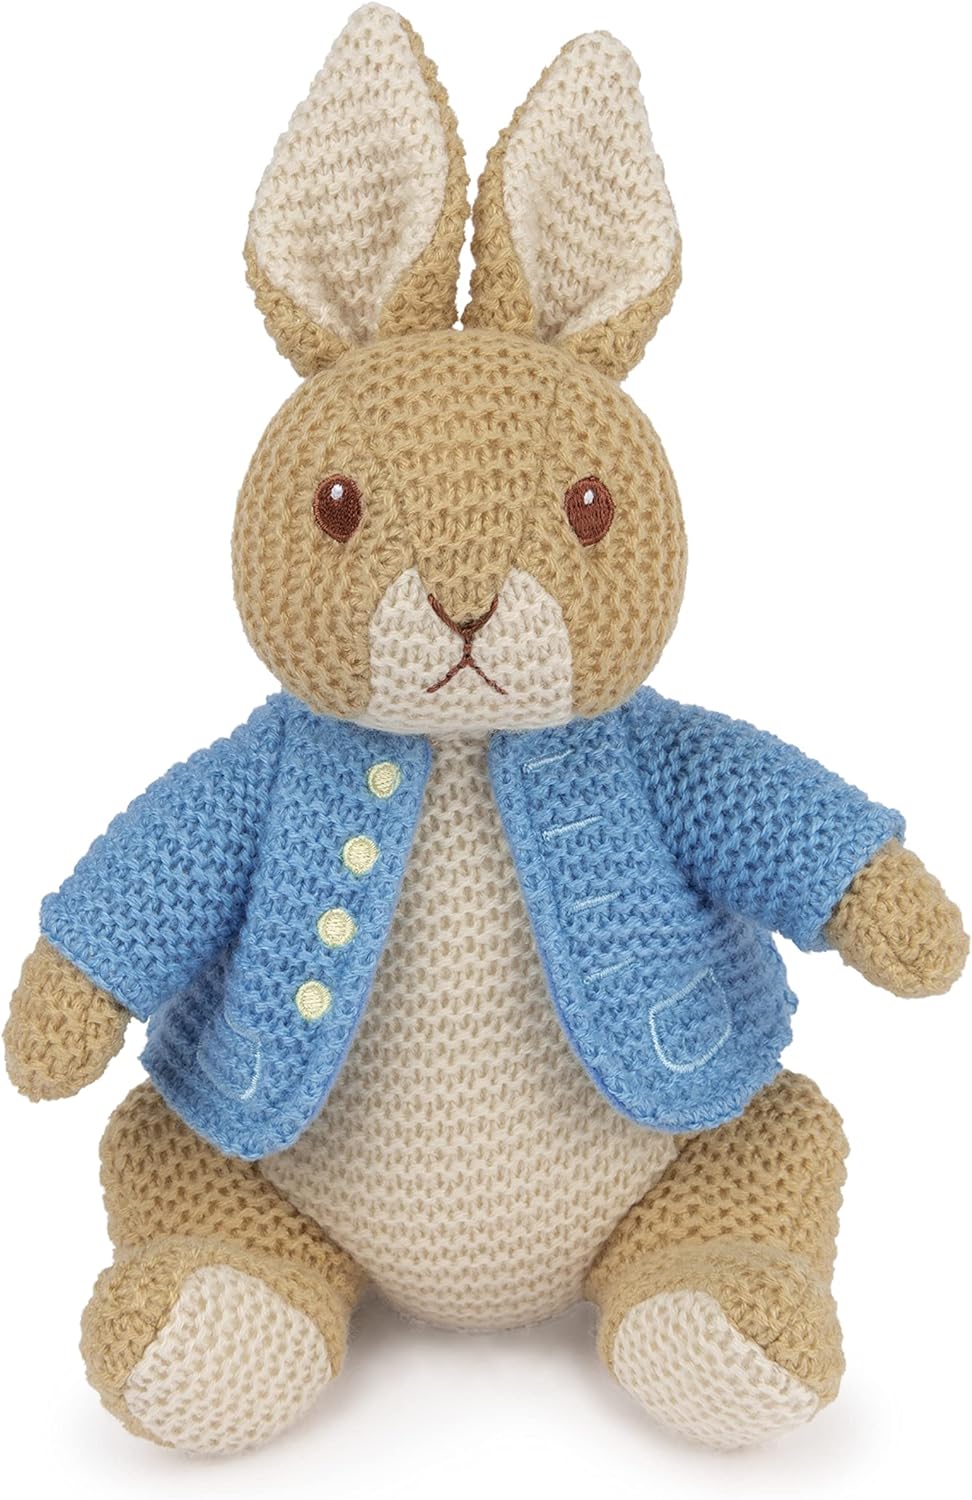 GUND Beatrix Potter Peter Rabbit Holding Chicks Plush, Stuffed Animal for Ages 1 and Up, Brown/Blue, 9.5” $14.44